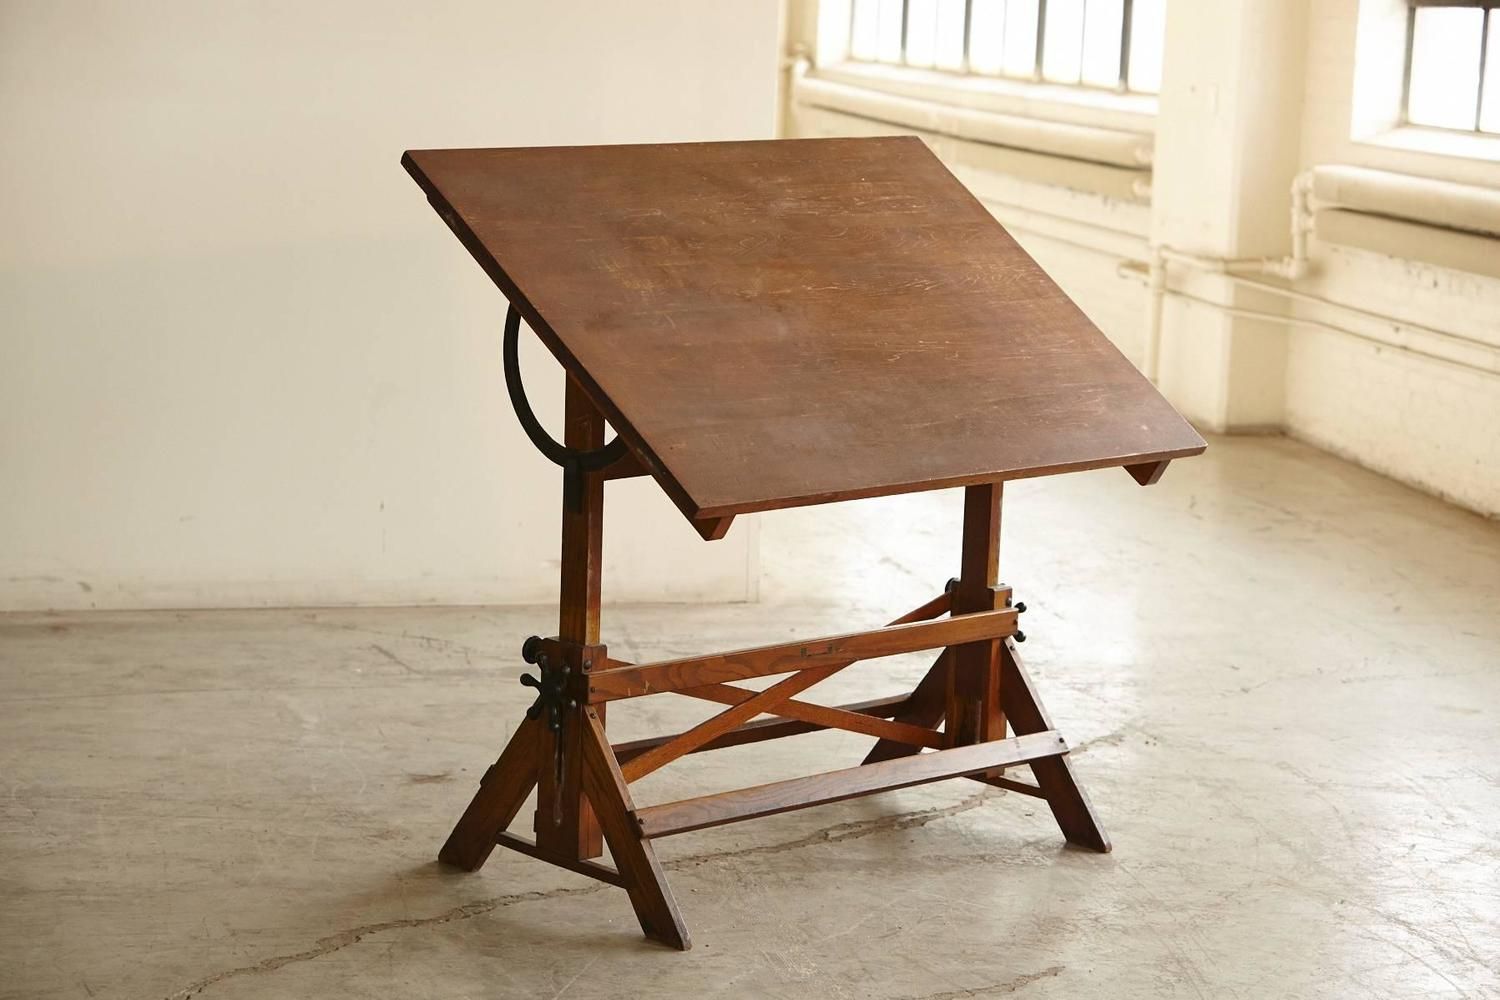 Antique Industrial American Oak Drafting Table At 1stdibs Throughout Weathered Oak Tilt Top Drafting Tables (View 2 of 15)